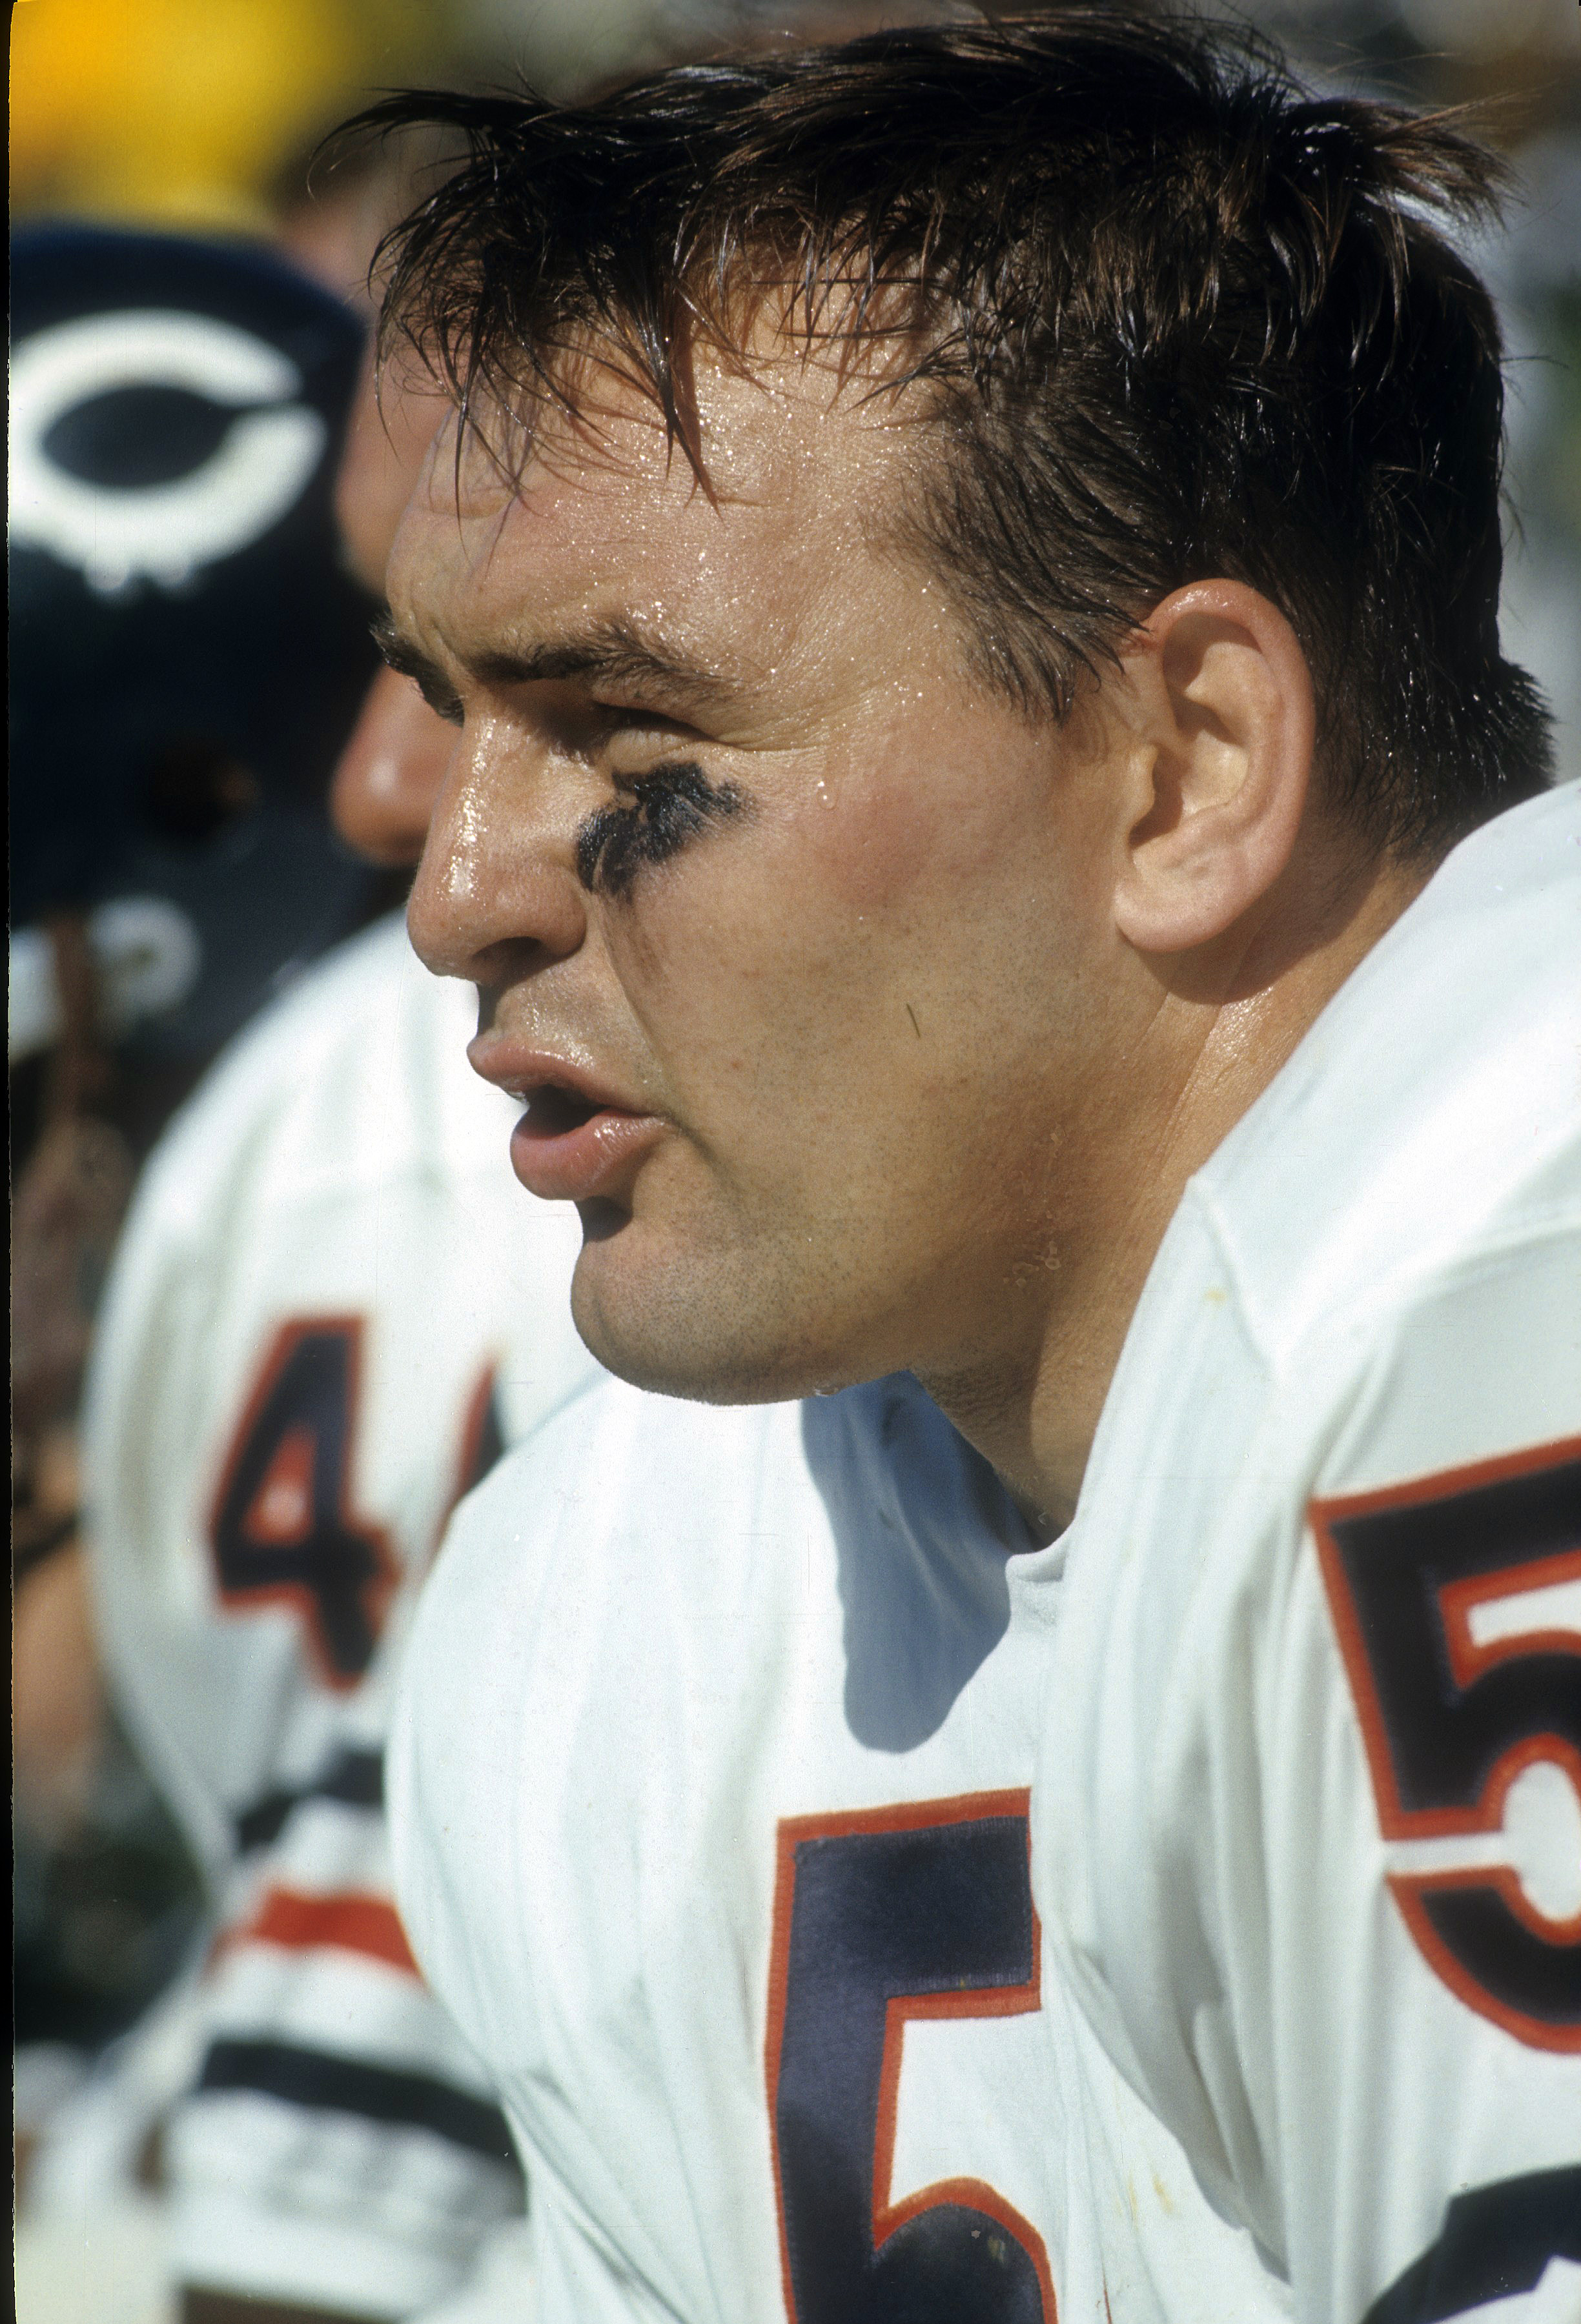 Dick Butkus during an NFL football game on January 1, 1968 | Sources: Getty Images